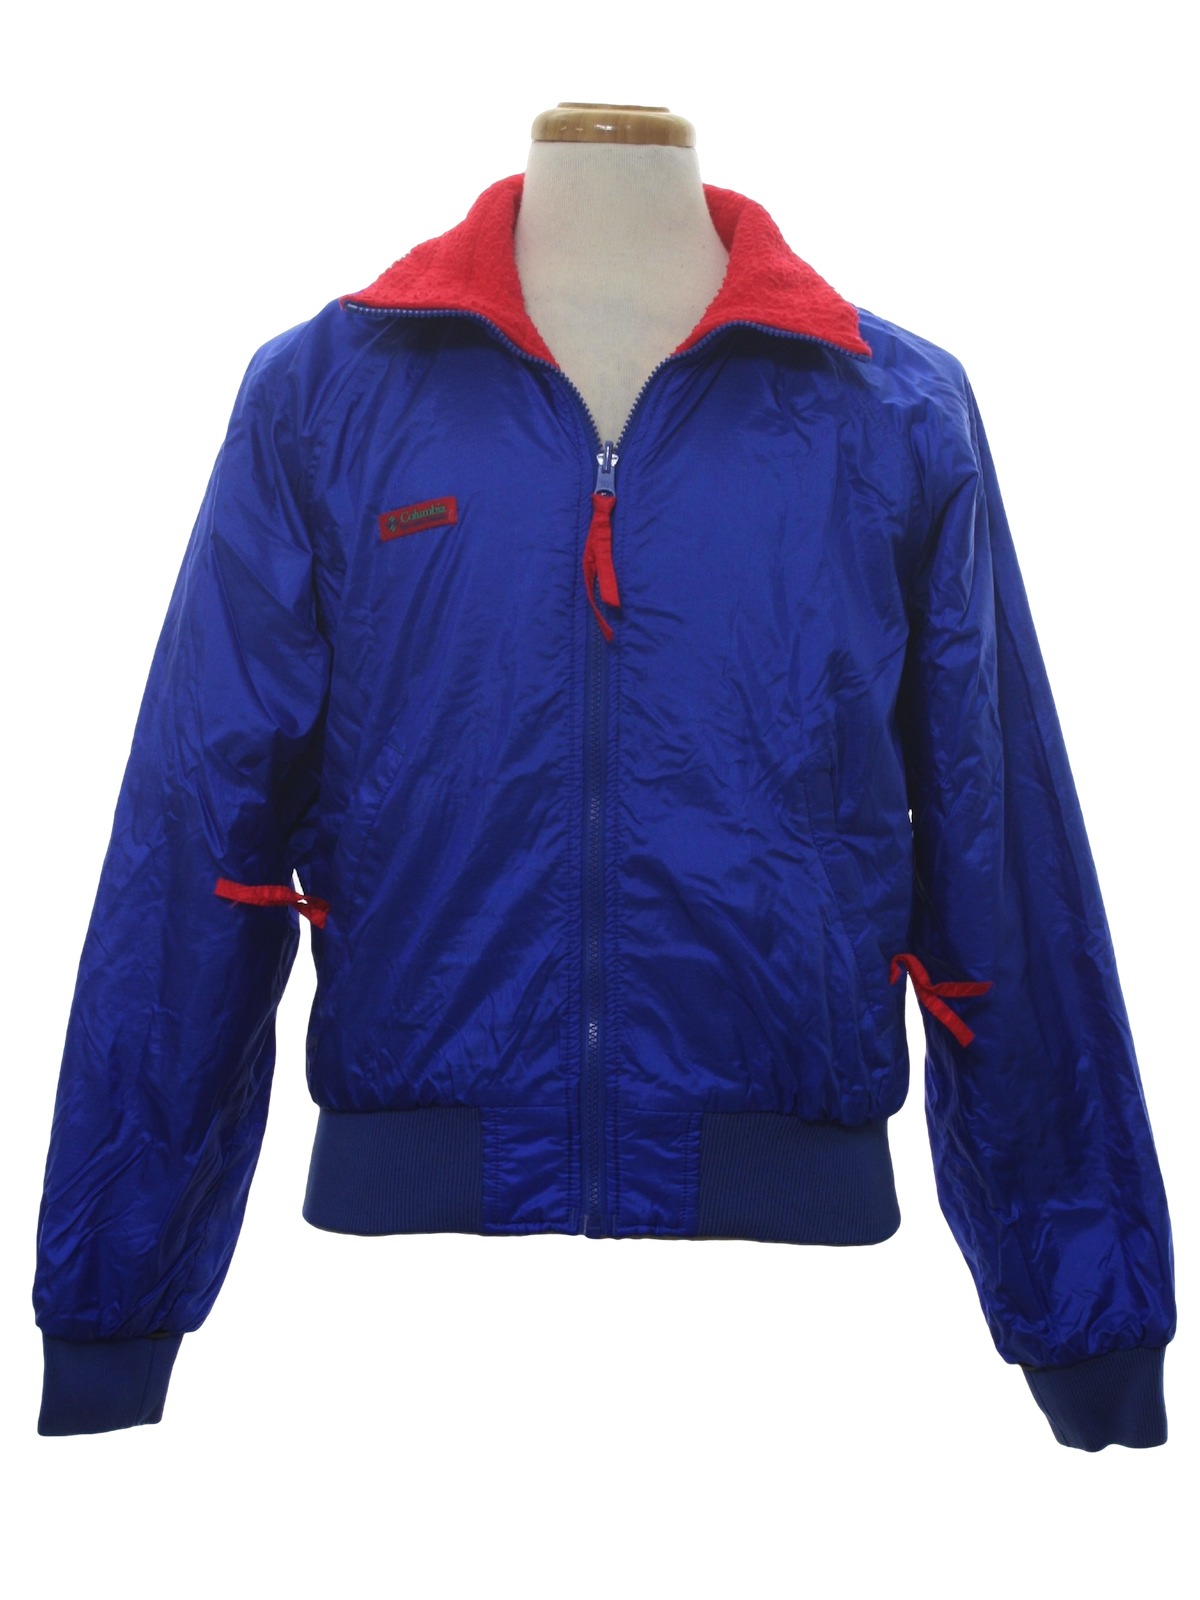 Vintage Columbia 1980s Jacket: Late 80s early 90s -Columbia- Mens shiny  royal blue background, longsleeve, zippered front nylon totally 80s ski  jacket with bright red fuzzy acrylic lining, two lower front zippered